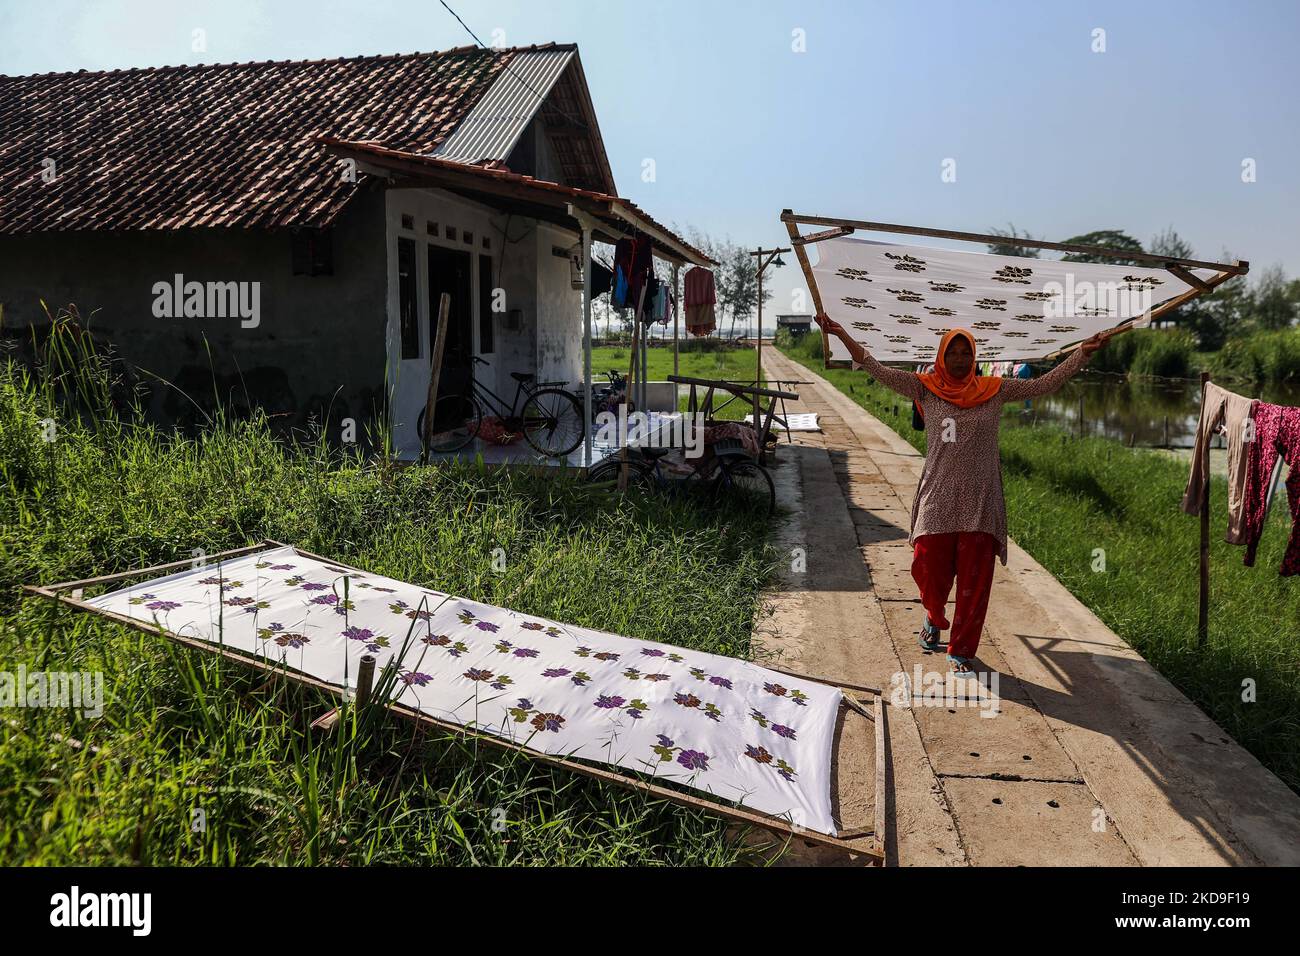 A worker dries batik after dyeing process as they make traditional Javanese textile called batik at low-lying Jeruk Sari neighborhood in coastal Pekalongan, Central Java, Indonesia, June 5, 2021. An area in which almost every available space is used for batik production, with a high level of poverty, vulnerable to both rising sea levels and high river peak flows. Pekalongan is a city known for batik, a traditional Indonesian method of using wax to resist water-based dyes to depict patterns and drawings, usually on fabric. This textile has traditionally been crafted by hand in family workshops  Stock Photo